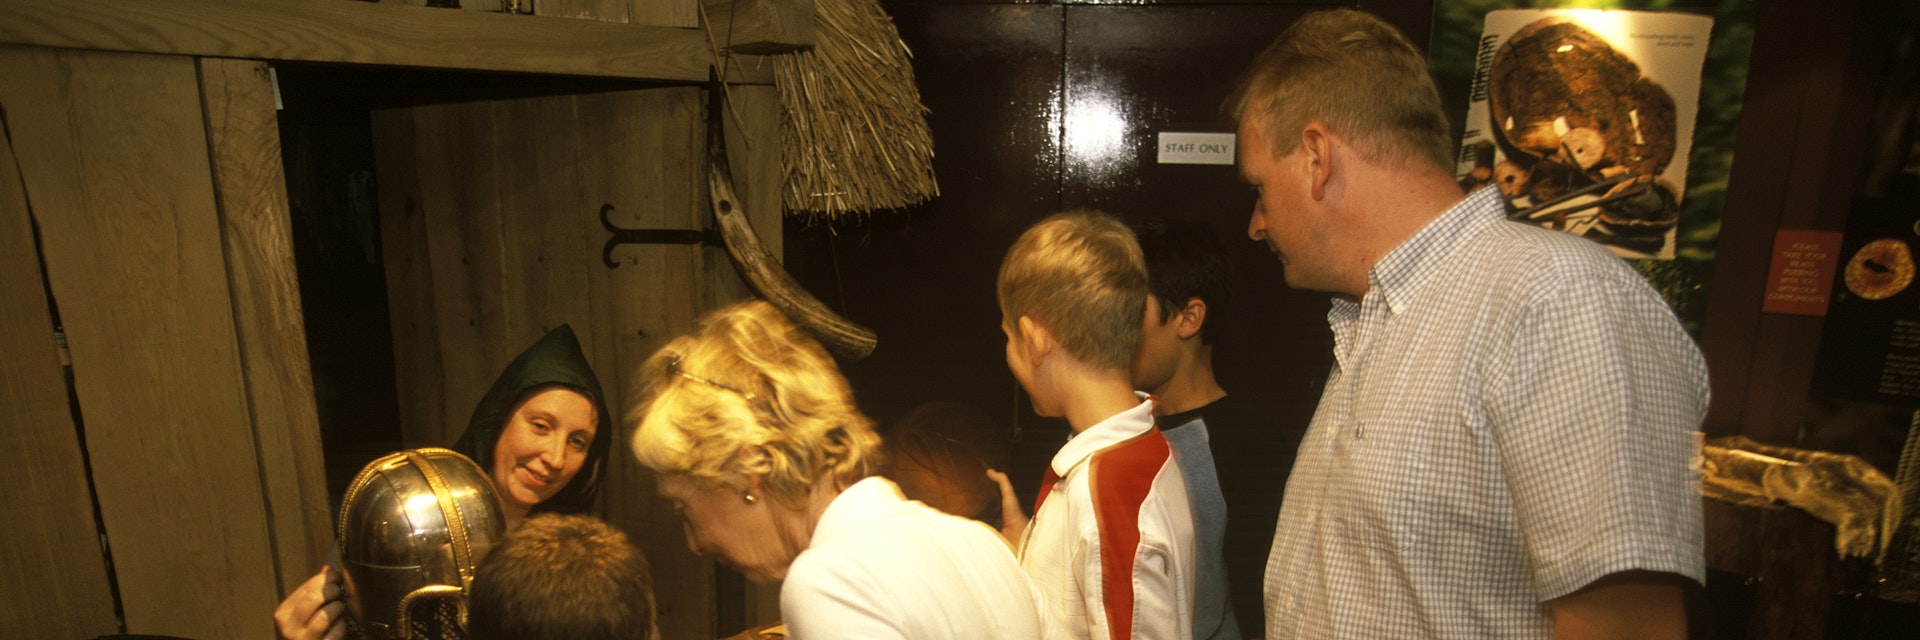 A family watch on as a woman in traditional dress demonstrating stitching at the Jorvik Viking Centre in York.